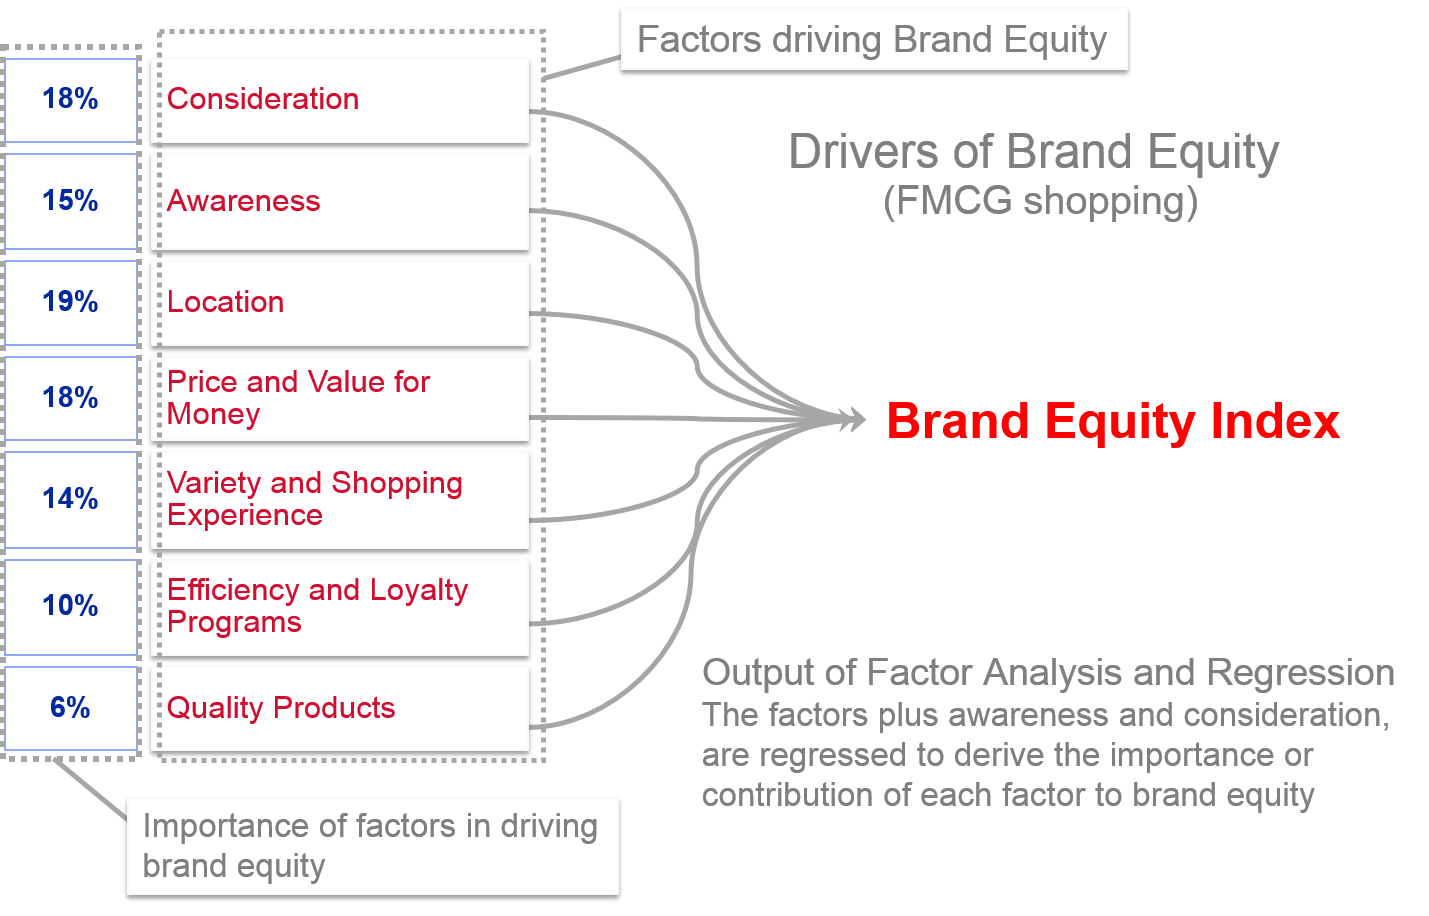 Deriving the factors’ contribution to brand equity